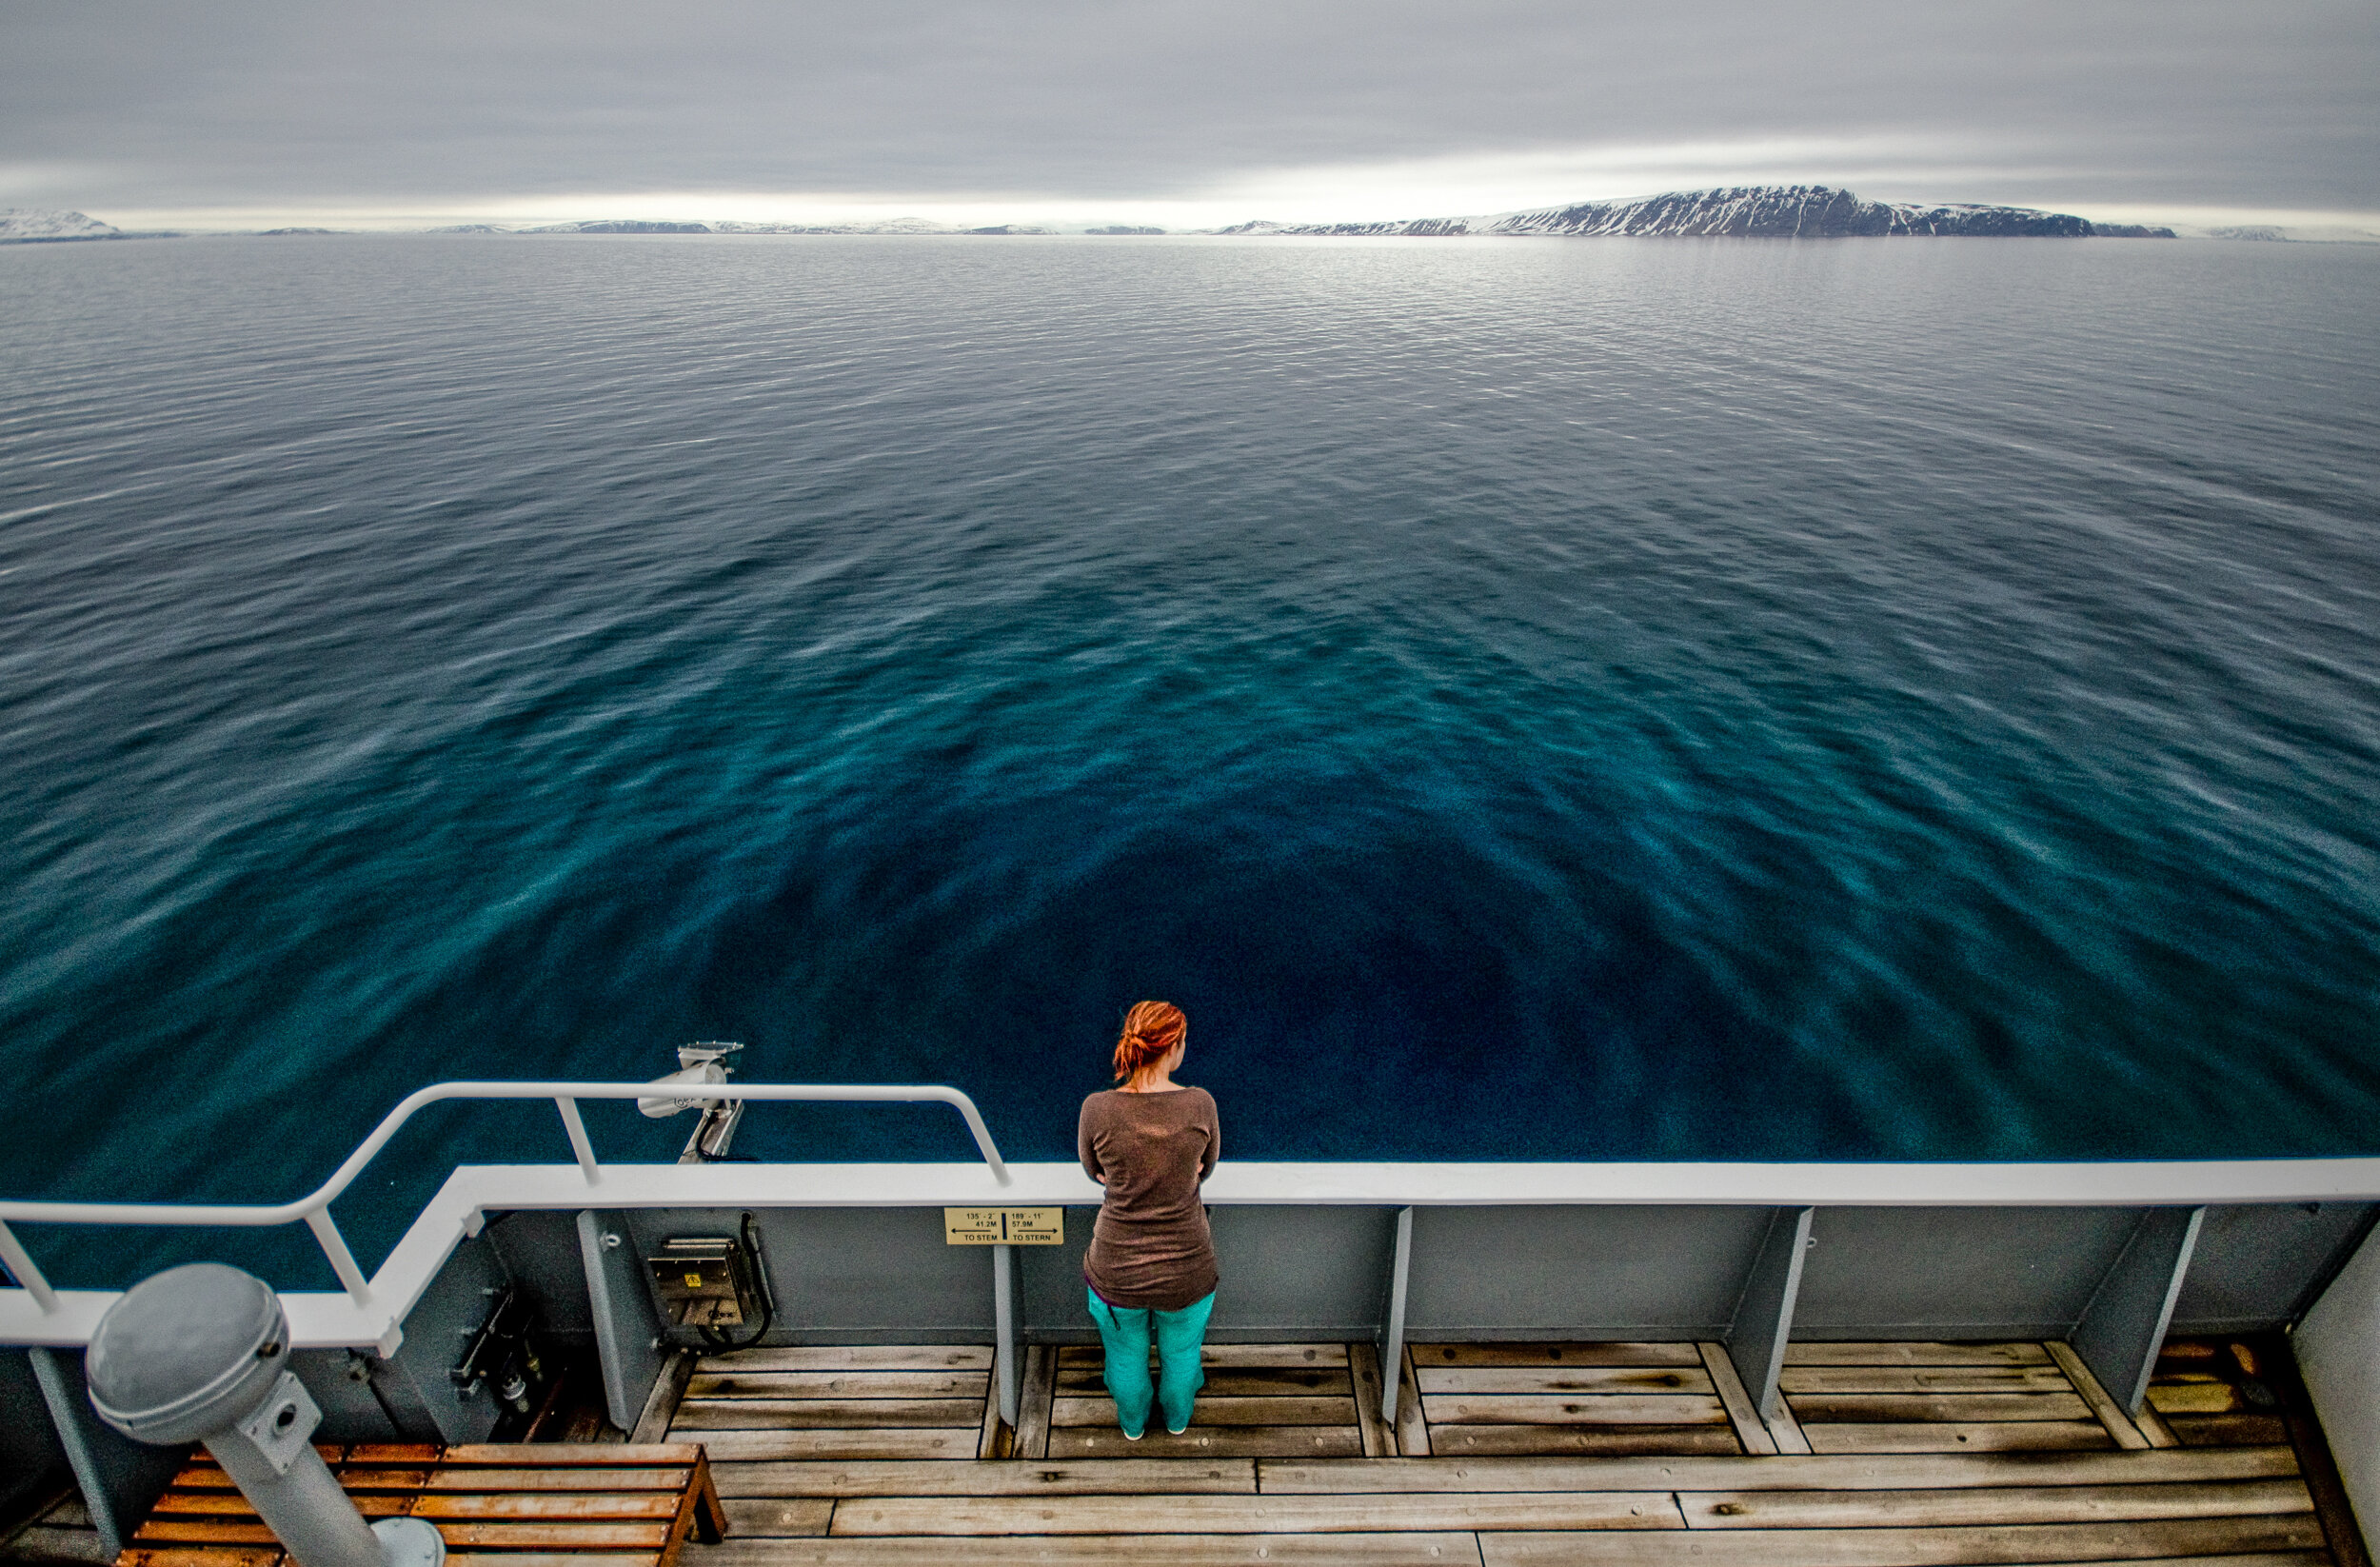 SAMS oceanographer Dr Marie Porter looks out to sea off Rijpfjorden, Svalbard during an Arctic PRIZE project research cruise on board the RRS James Clark Ross. JONAA©Dr Callum Whyte, SAMS